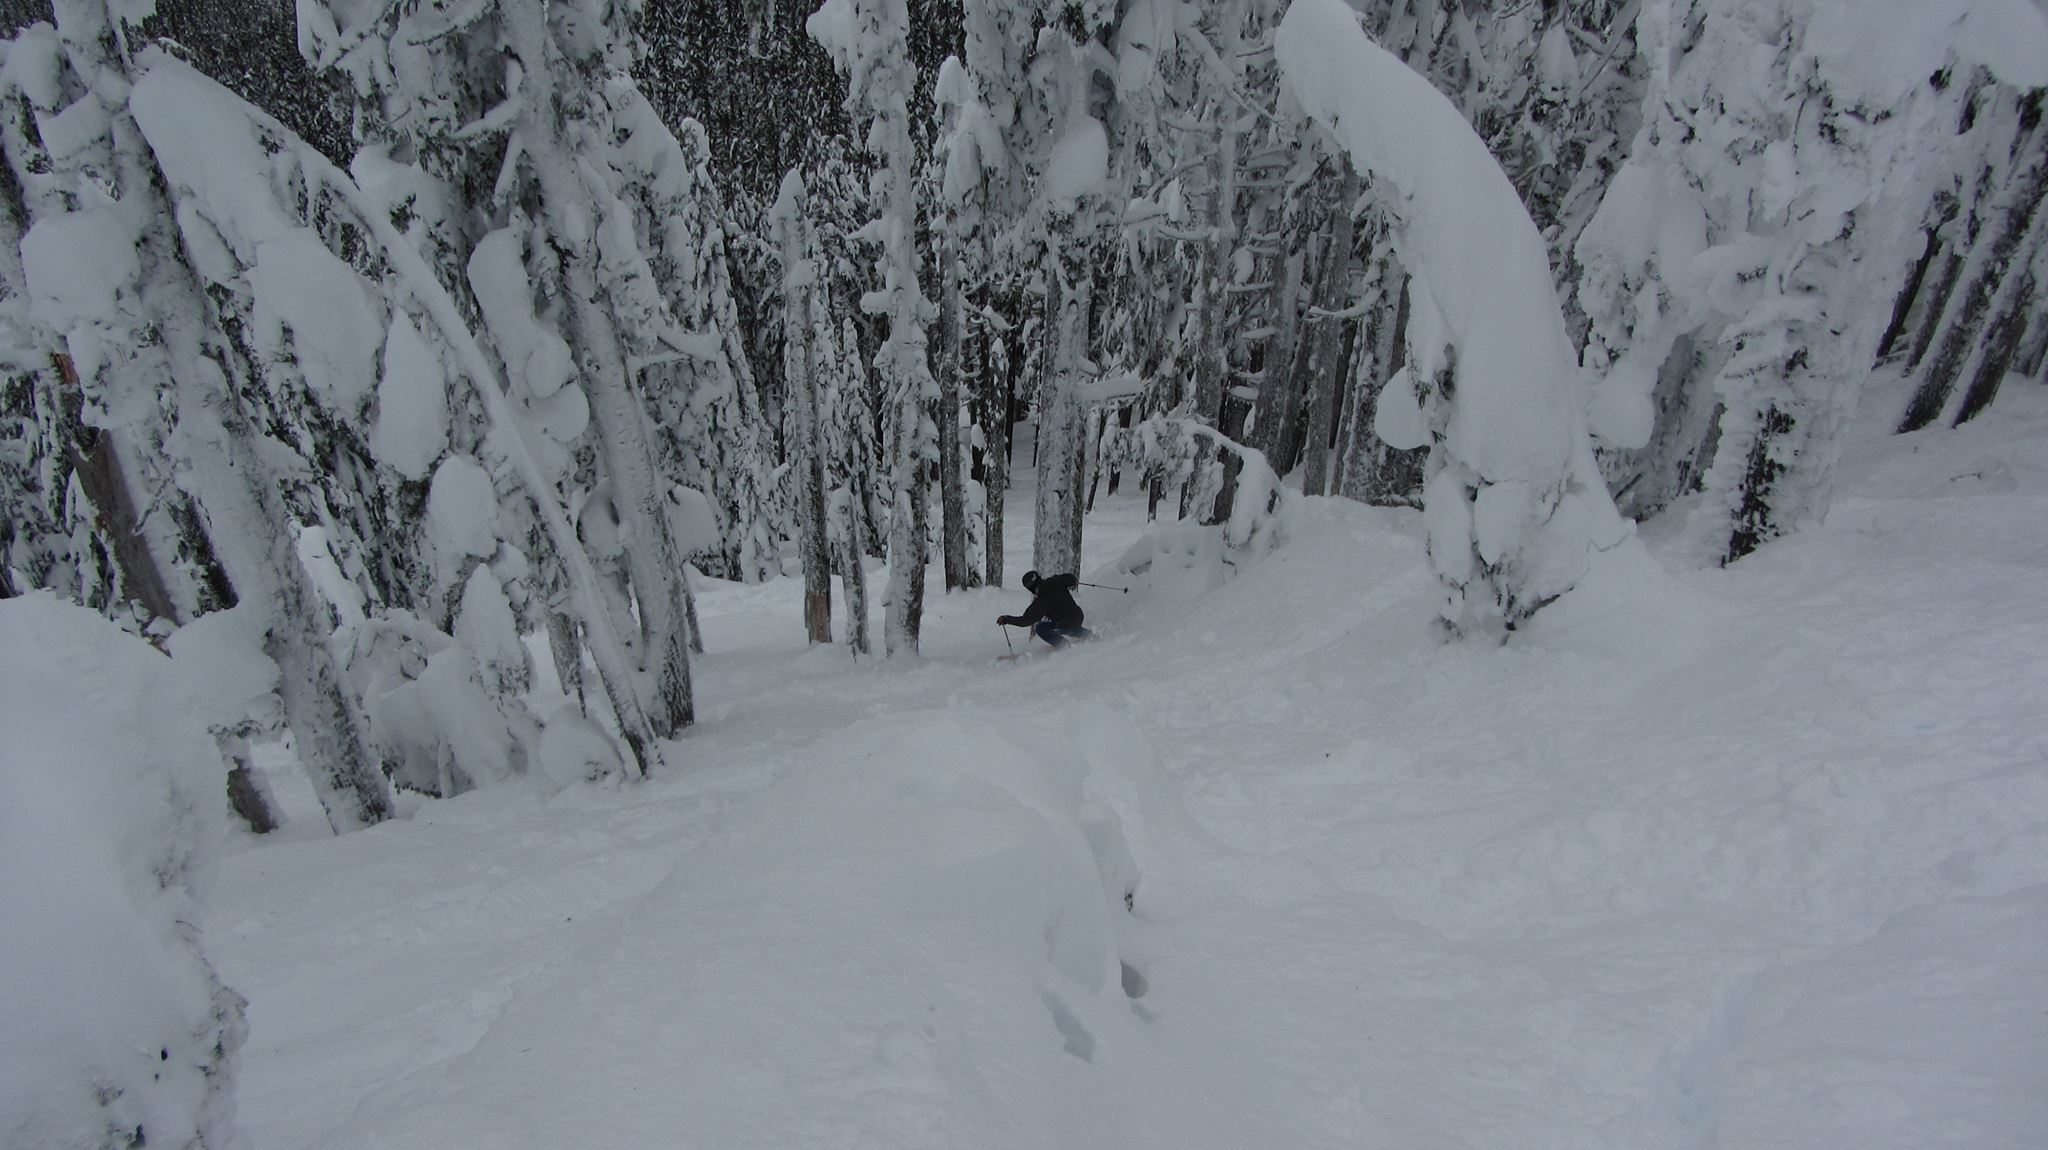 Just more epic powder ripping in the gnarly woods. Endless stoke day!